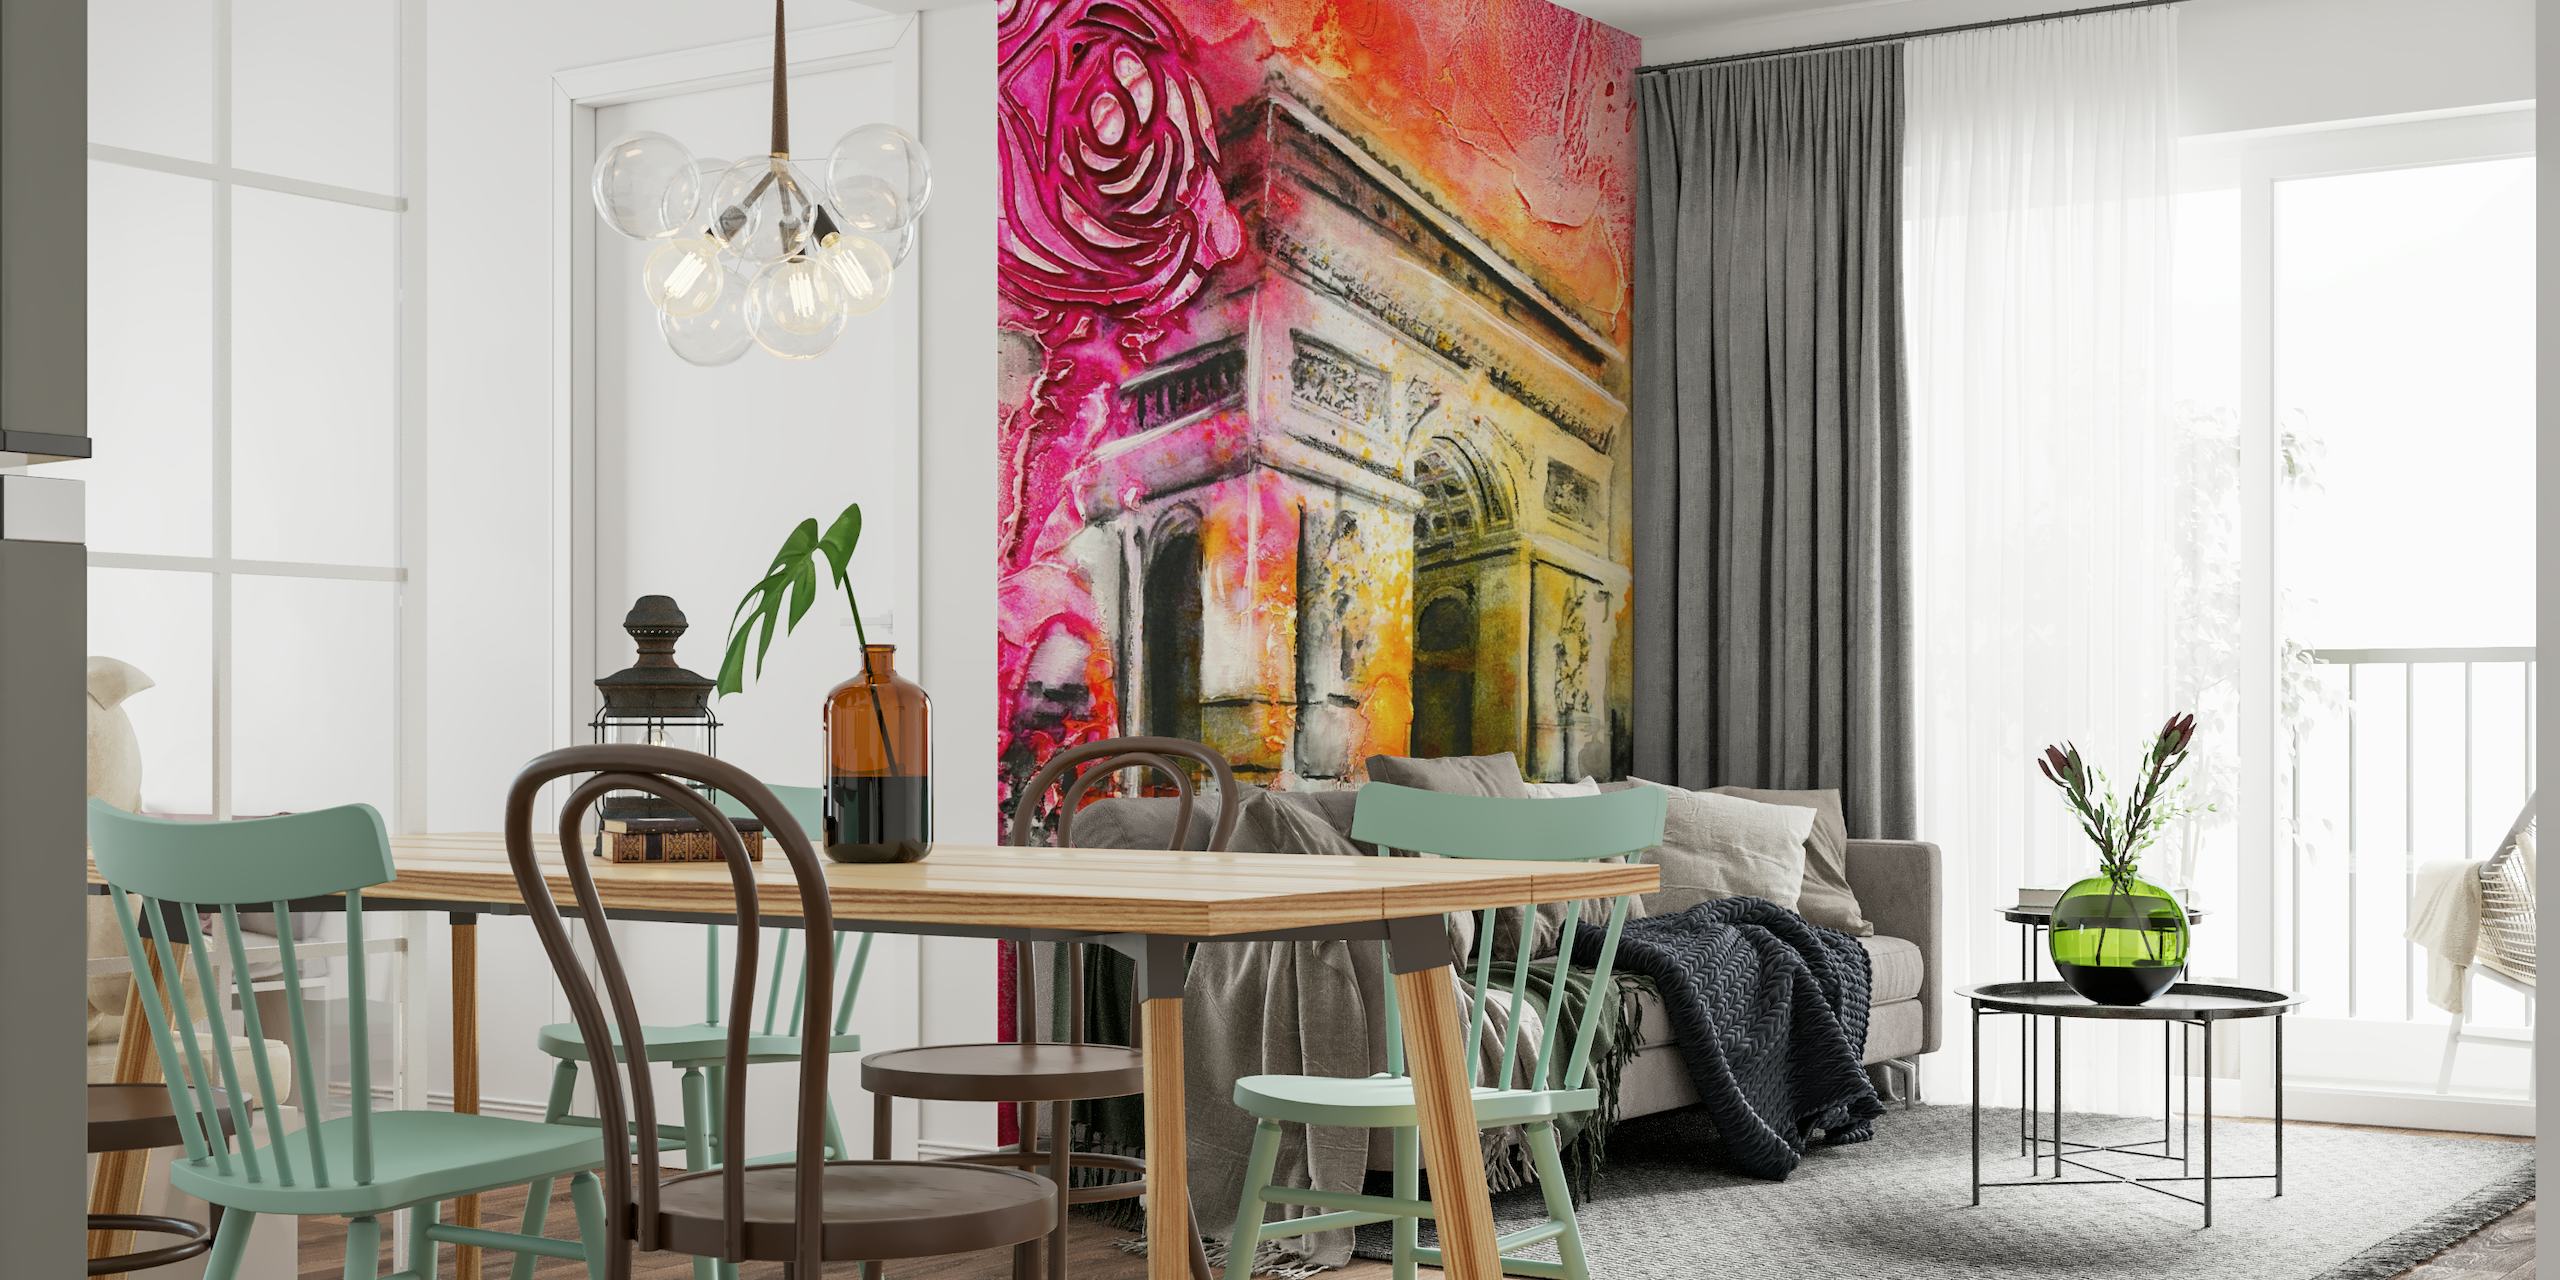 Expressive and colorful Paris-inspired wall mural featuring the Arc de Triomphe in bold pinks and reds.